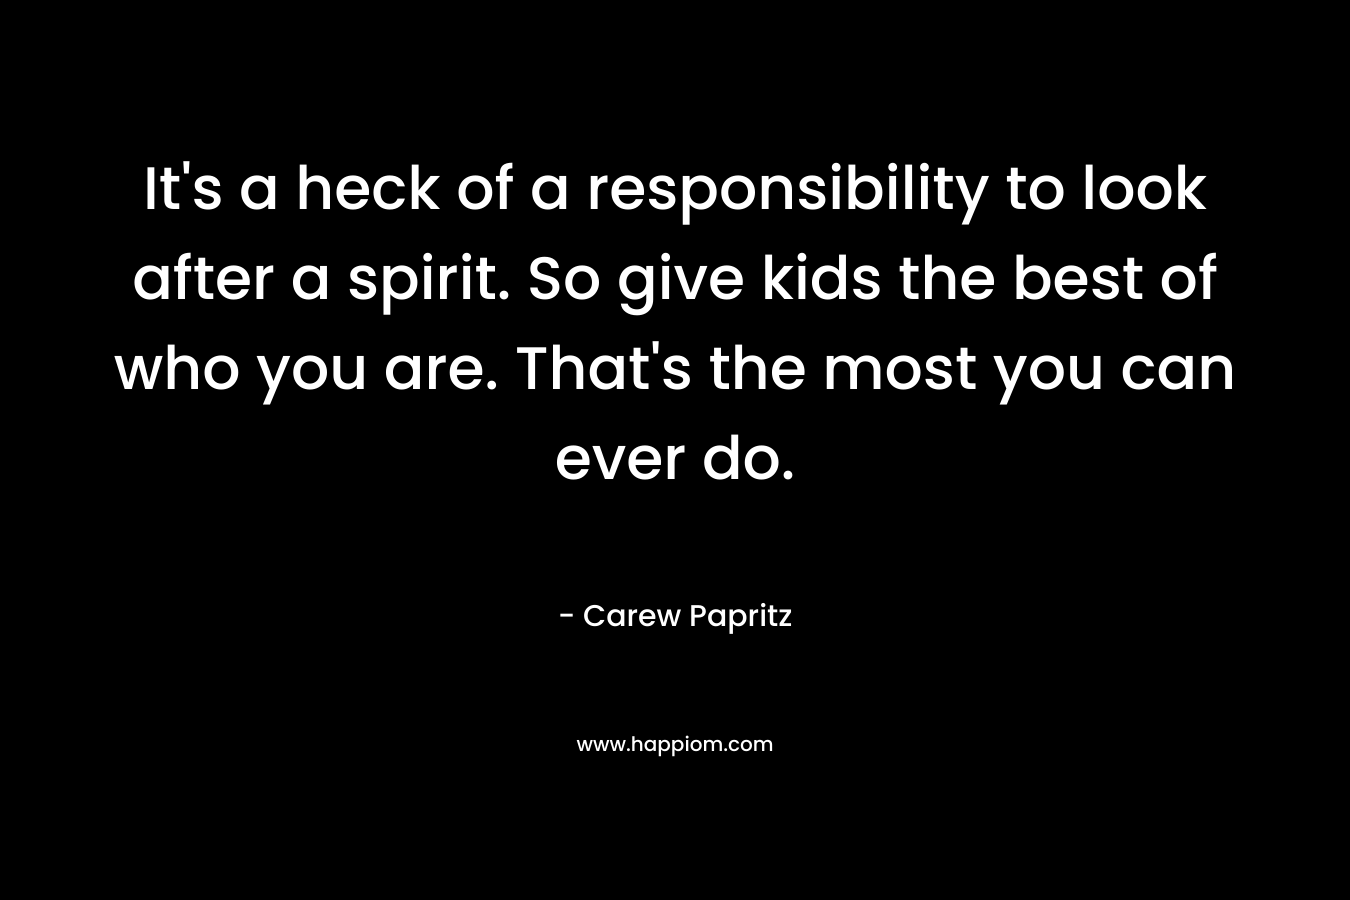 It's a heck of a responsibility to look after a spirit. So give kids the best of who you are. That's the most you can ever do.